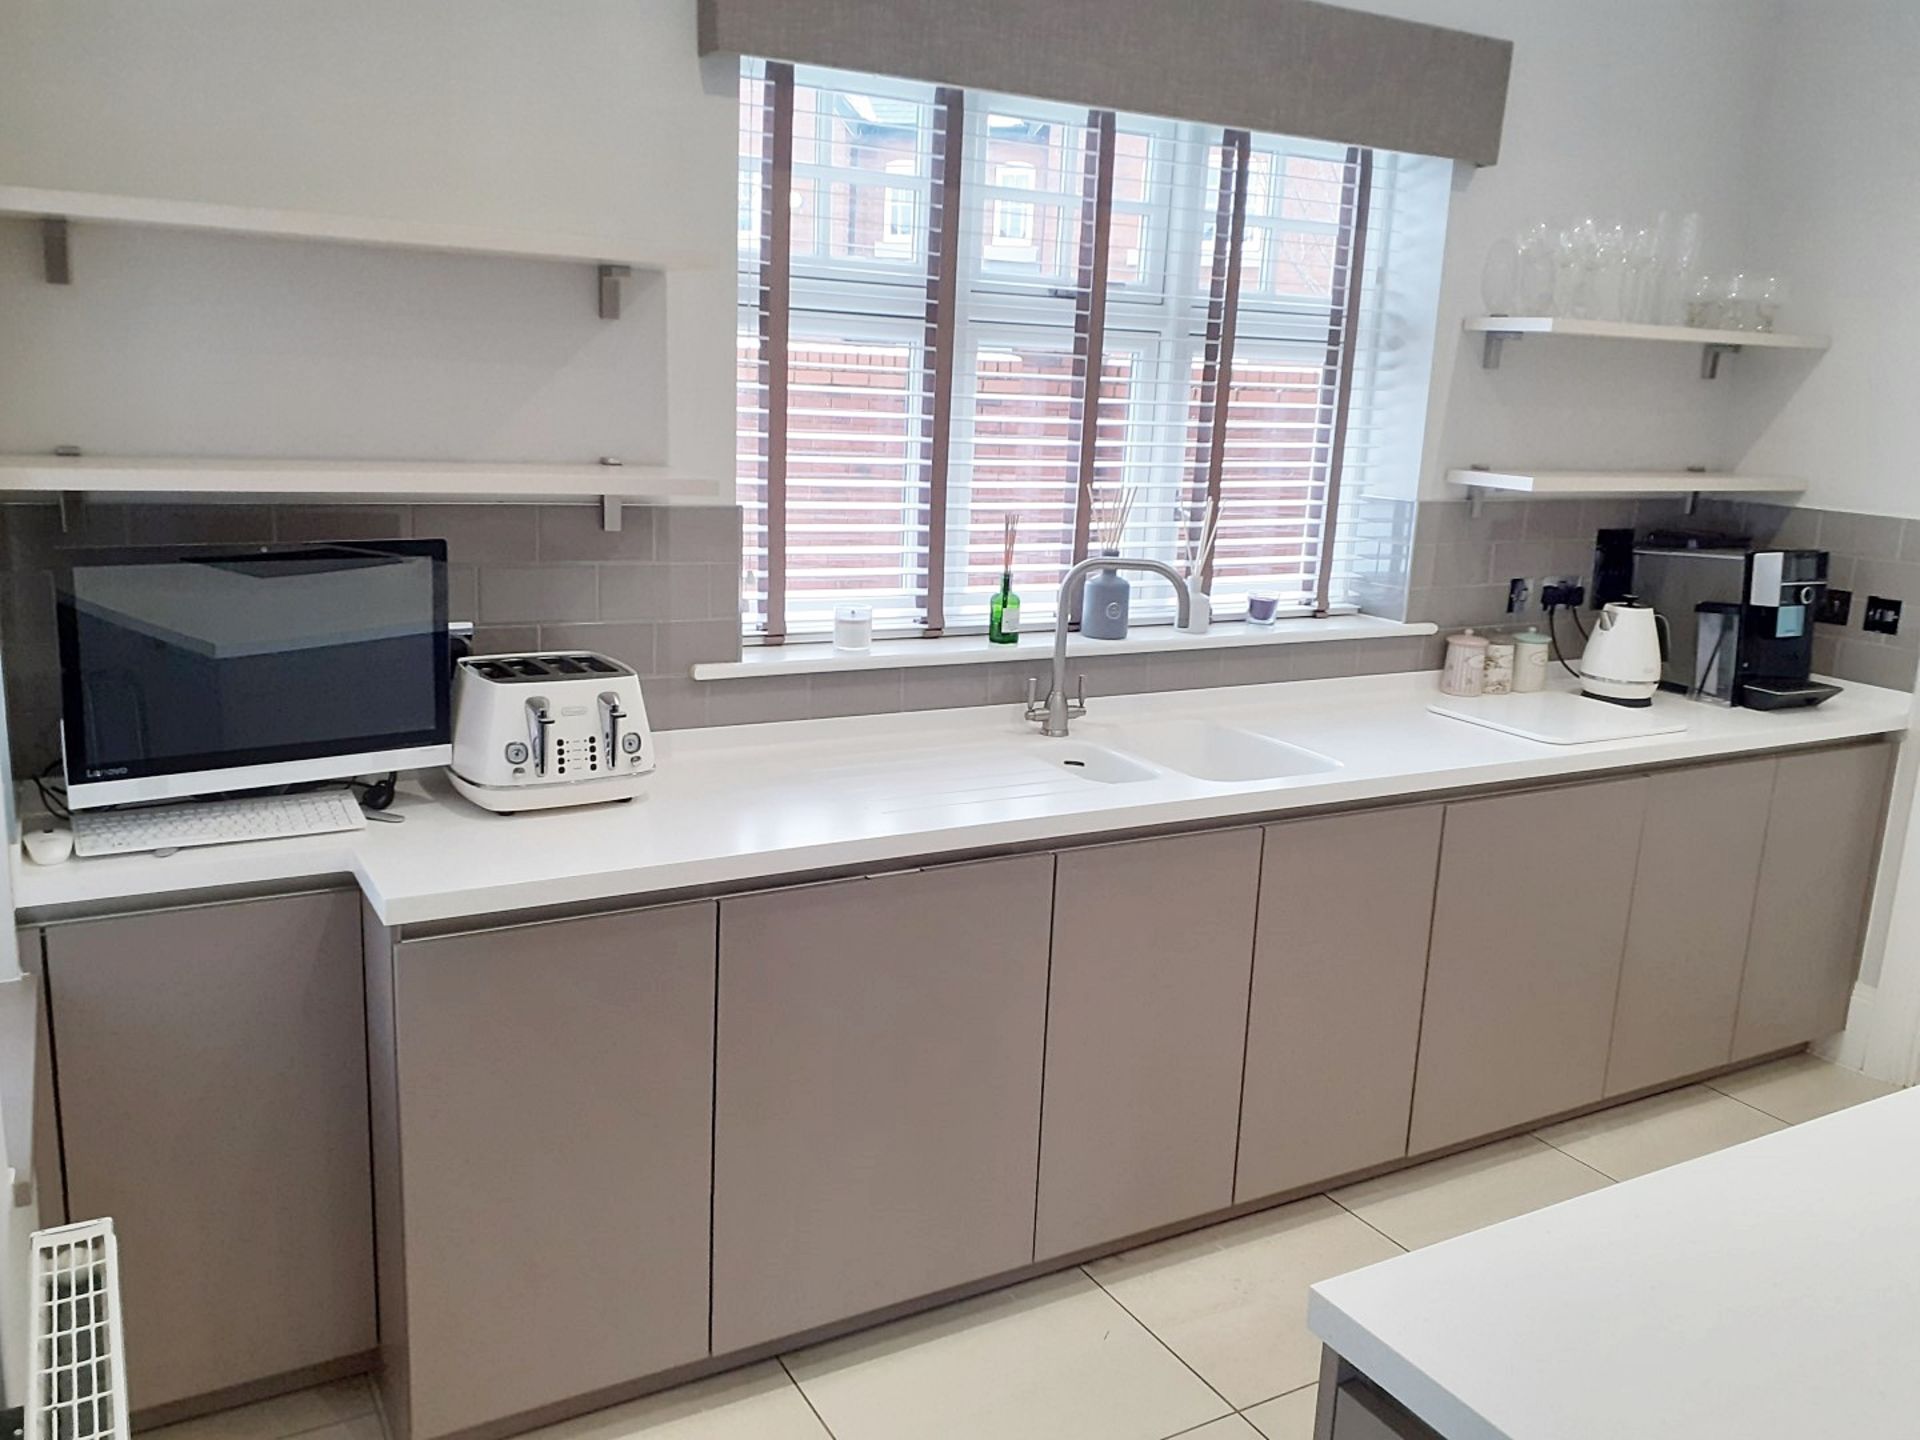 1 x SieMatic Handleless Fitted Kitchen With Intergrated NEFF Appliances, Corian Worktops And Island - Image 18 of 92